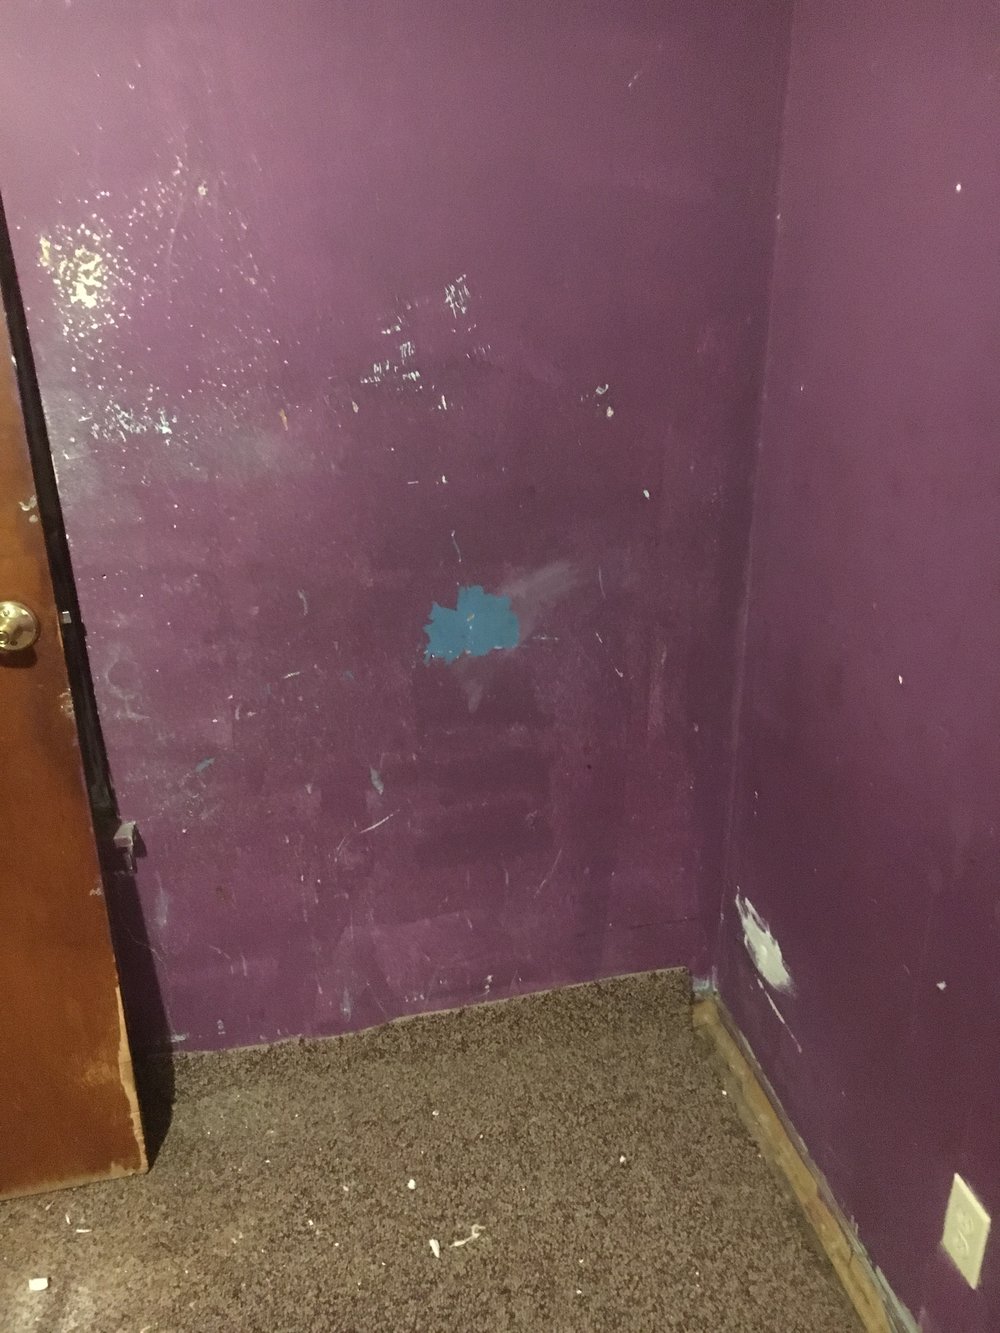 There were hundreds of little holes in the bedroom walls